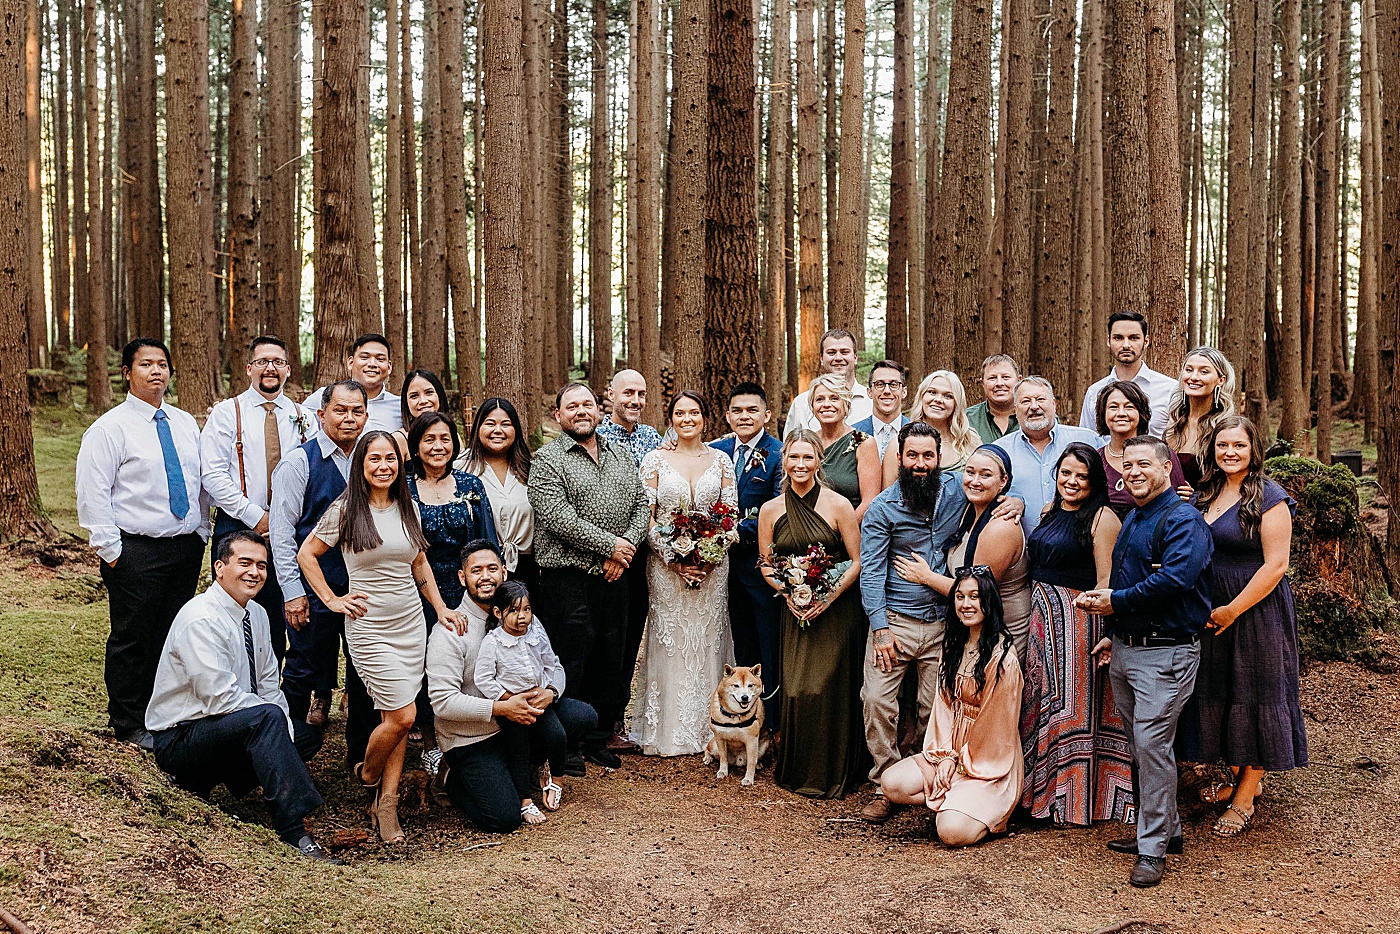 Bride and groom with immediate friends and family during intimate wedding at Emerald Forest | Photo by Megan Montalvo Photography